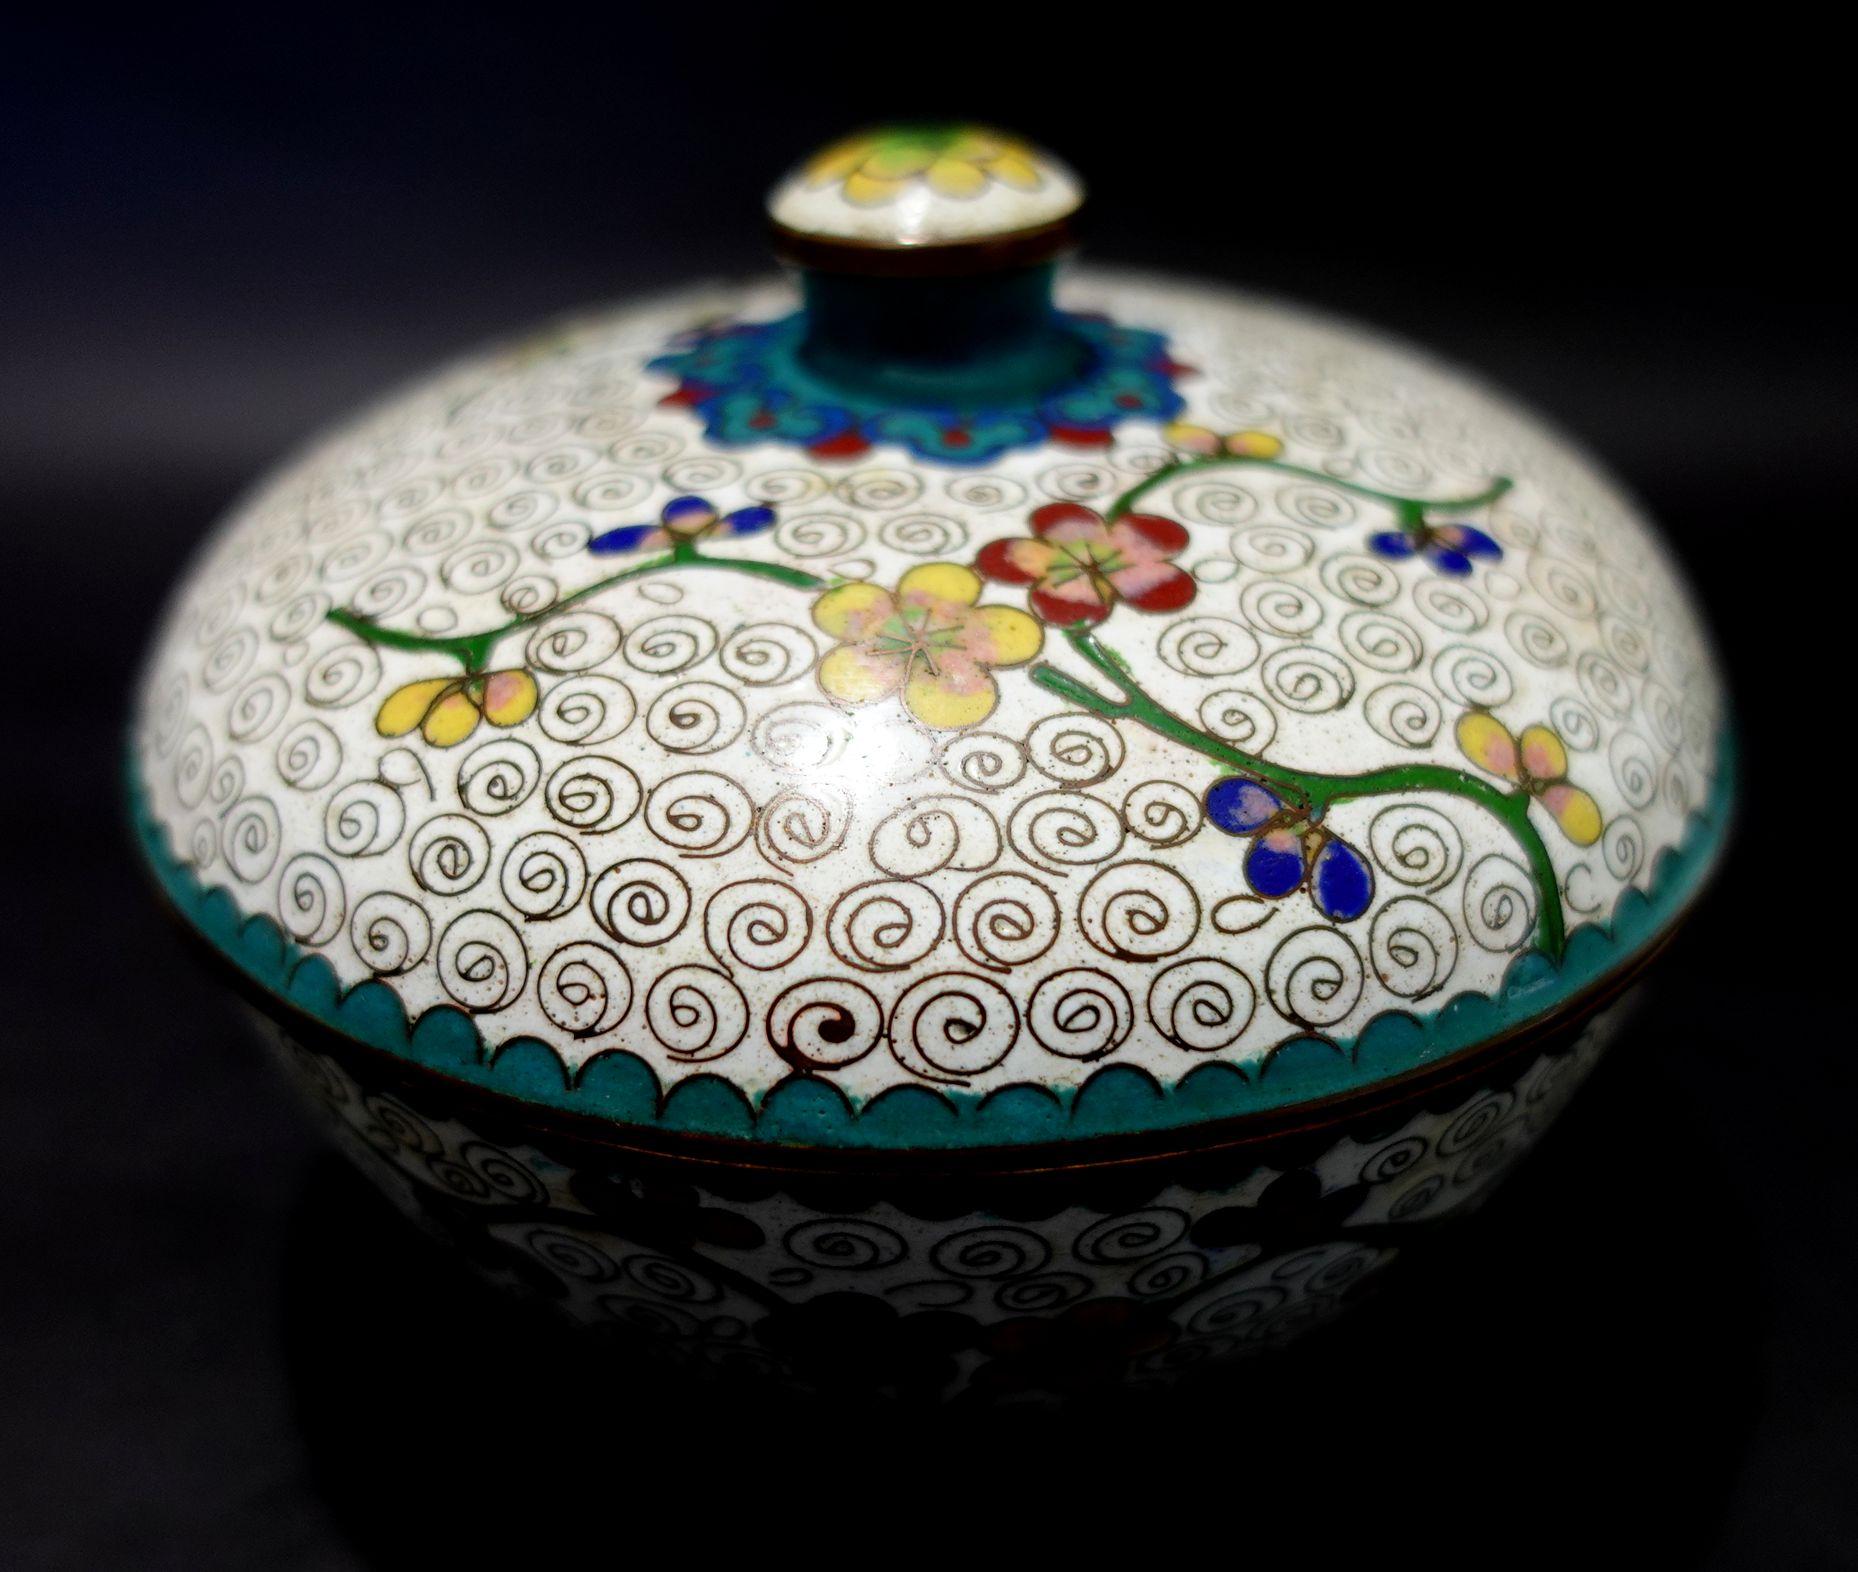 Antique Chinese cloisonné enamel round box with lid depicting floral patterns. A white base tone and colorful floral all around, from the 19th century.
